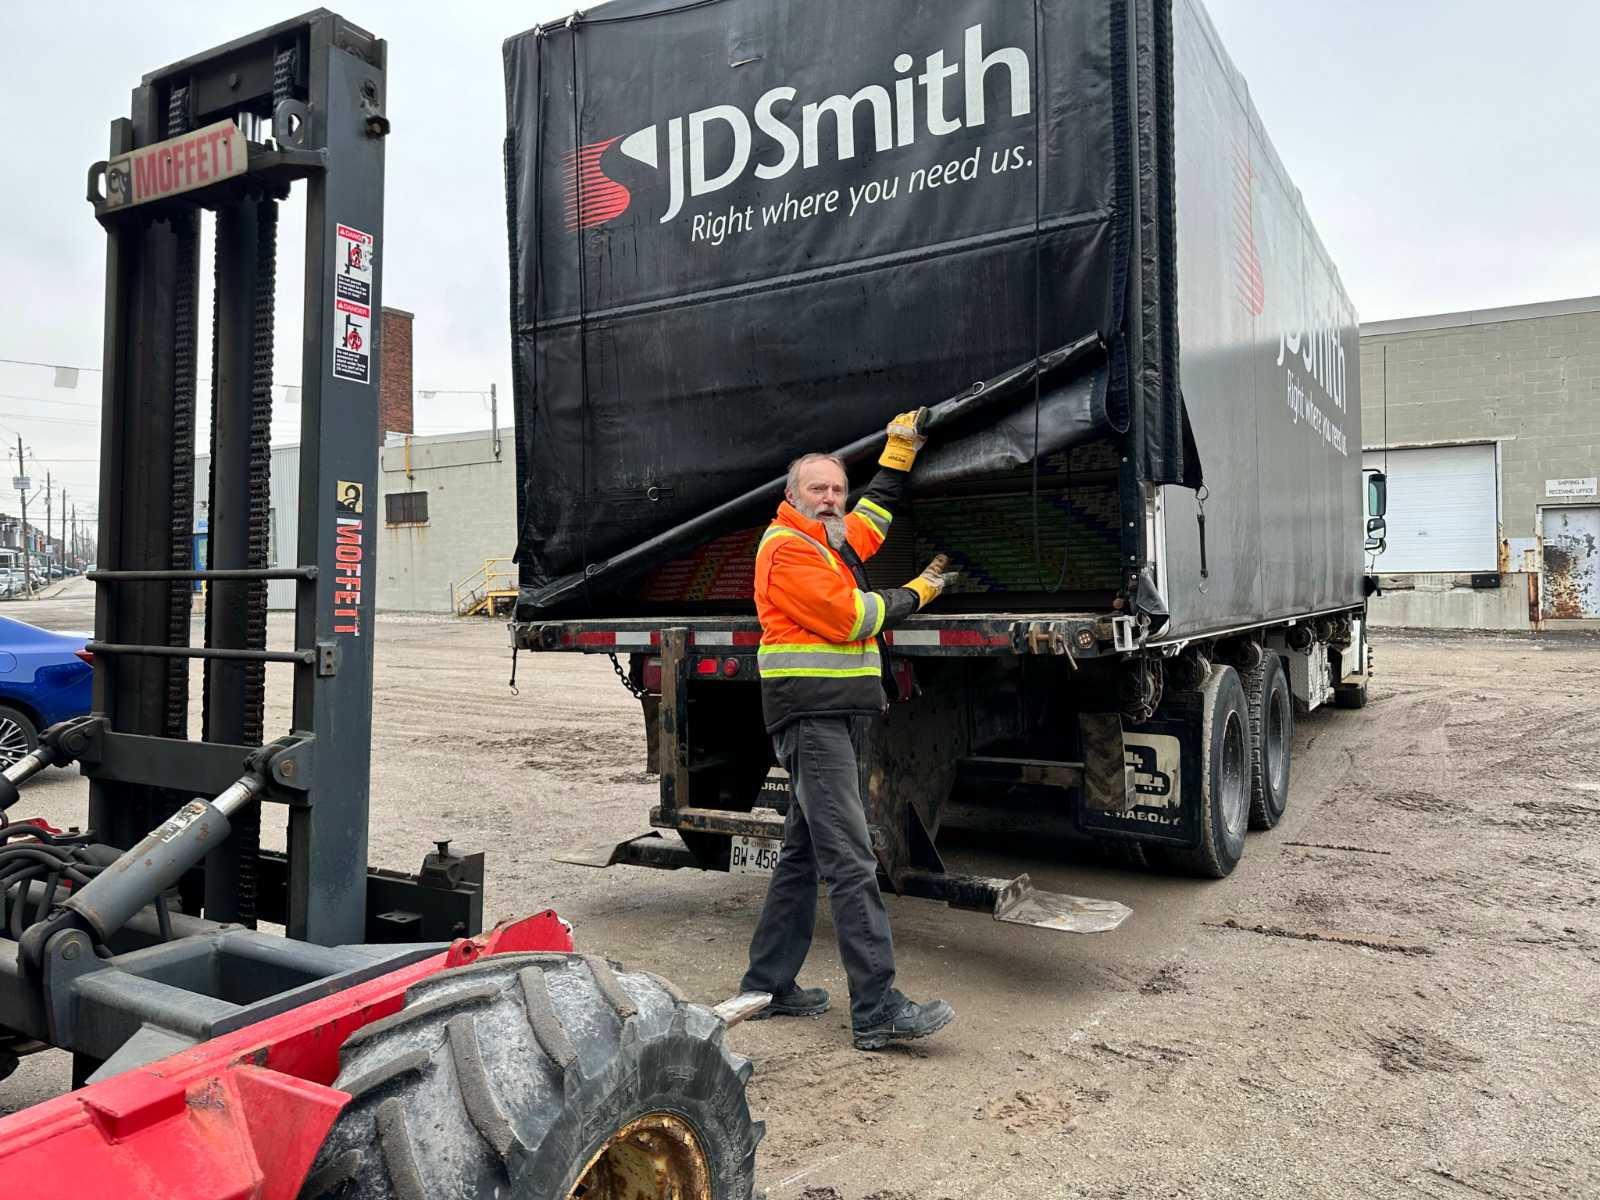 JD Smith truck for habitat for humanity